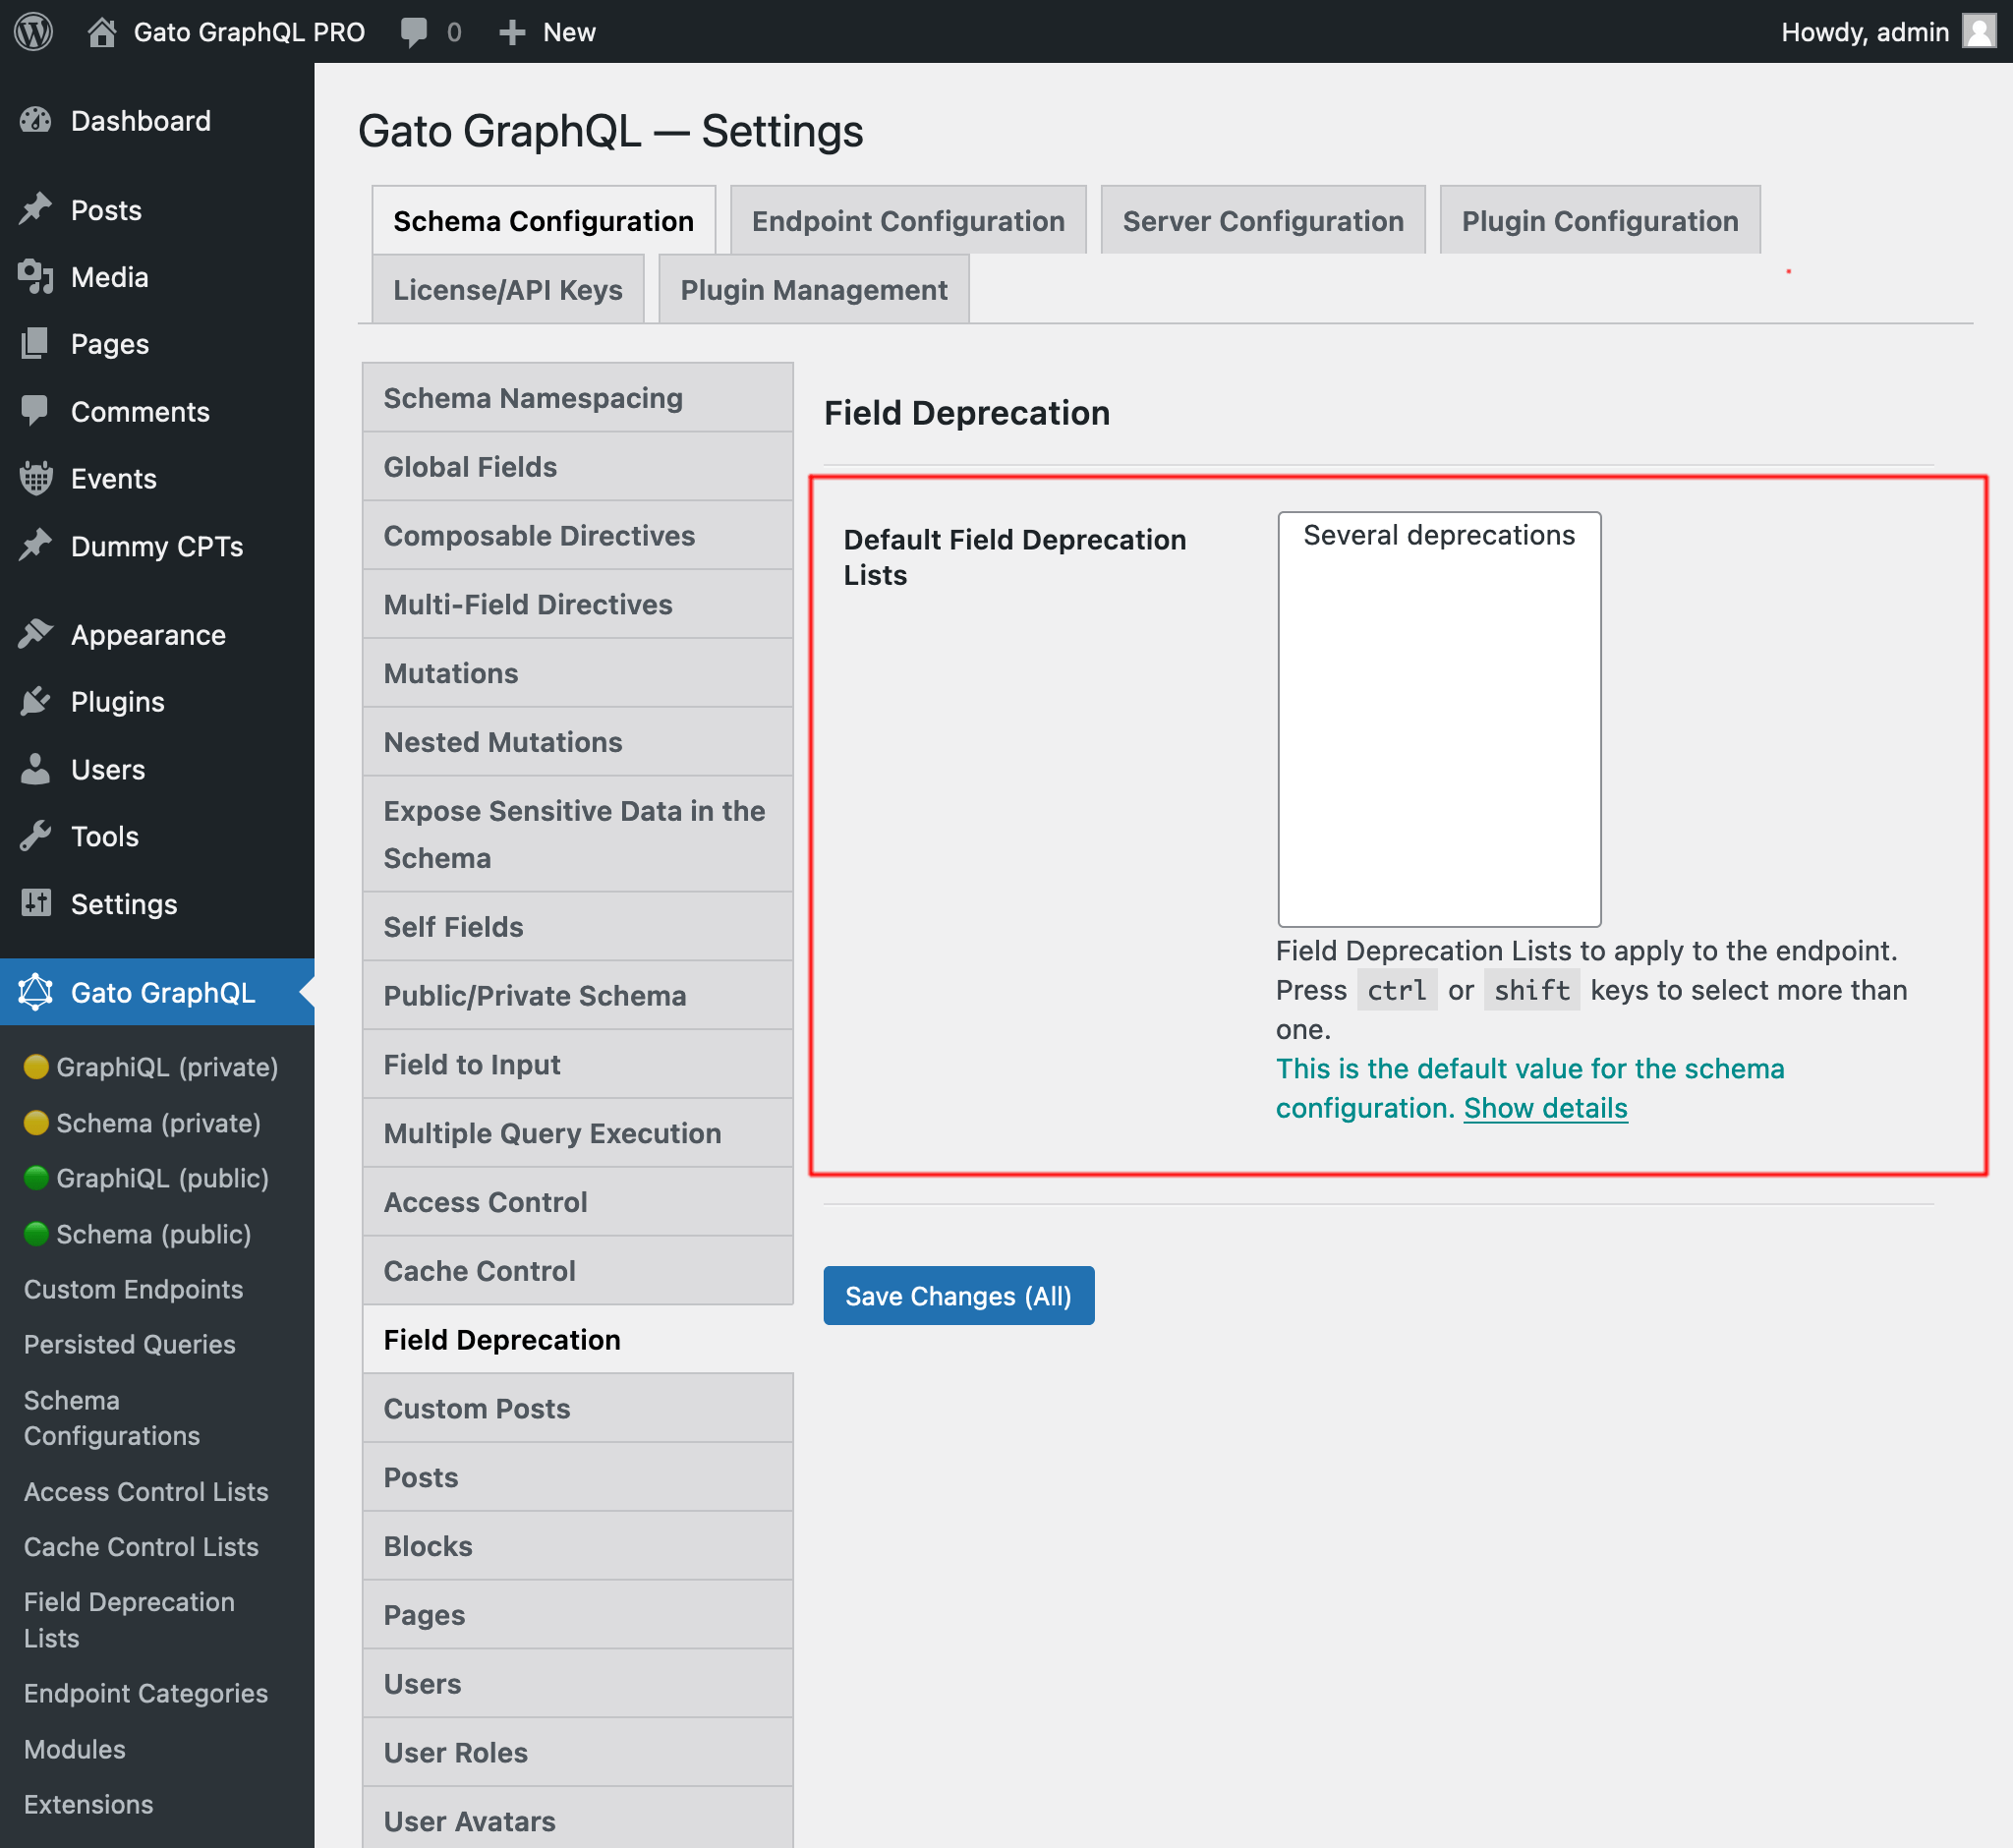 Selecting the default Field Deprecation Lists in the Settings page